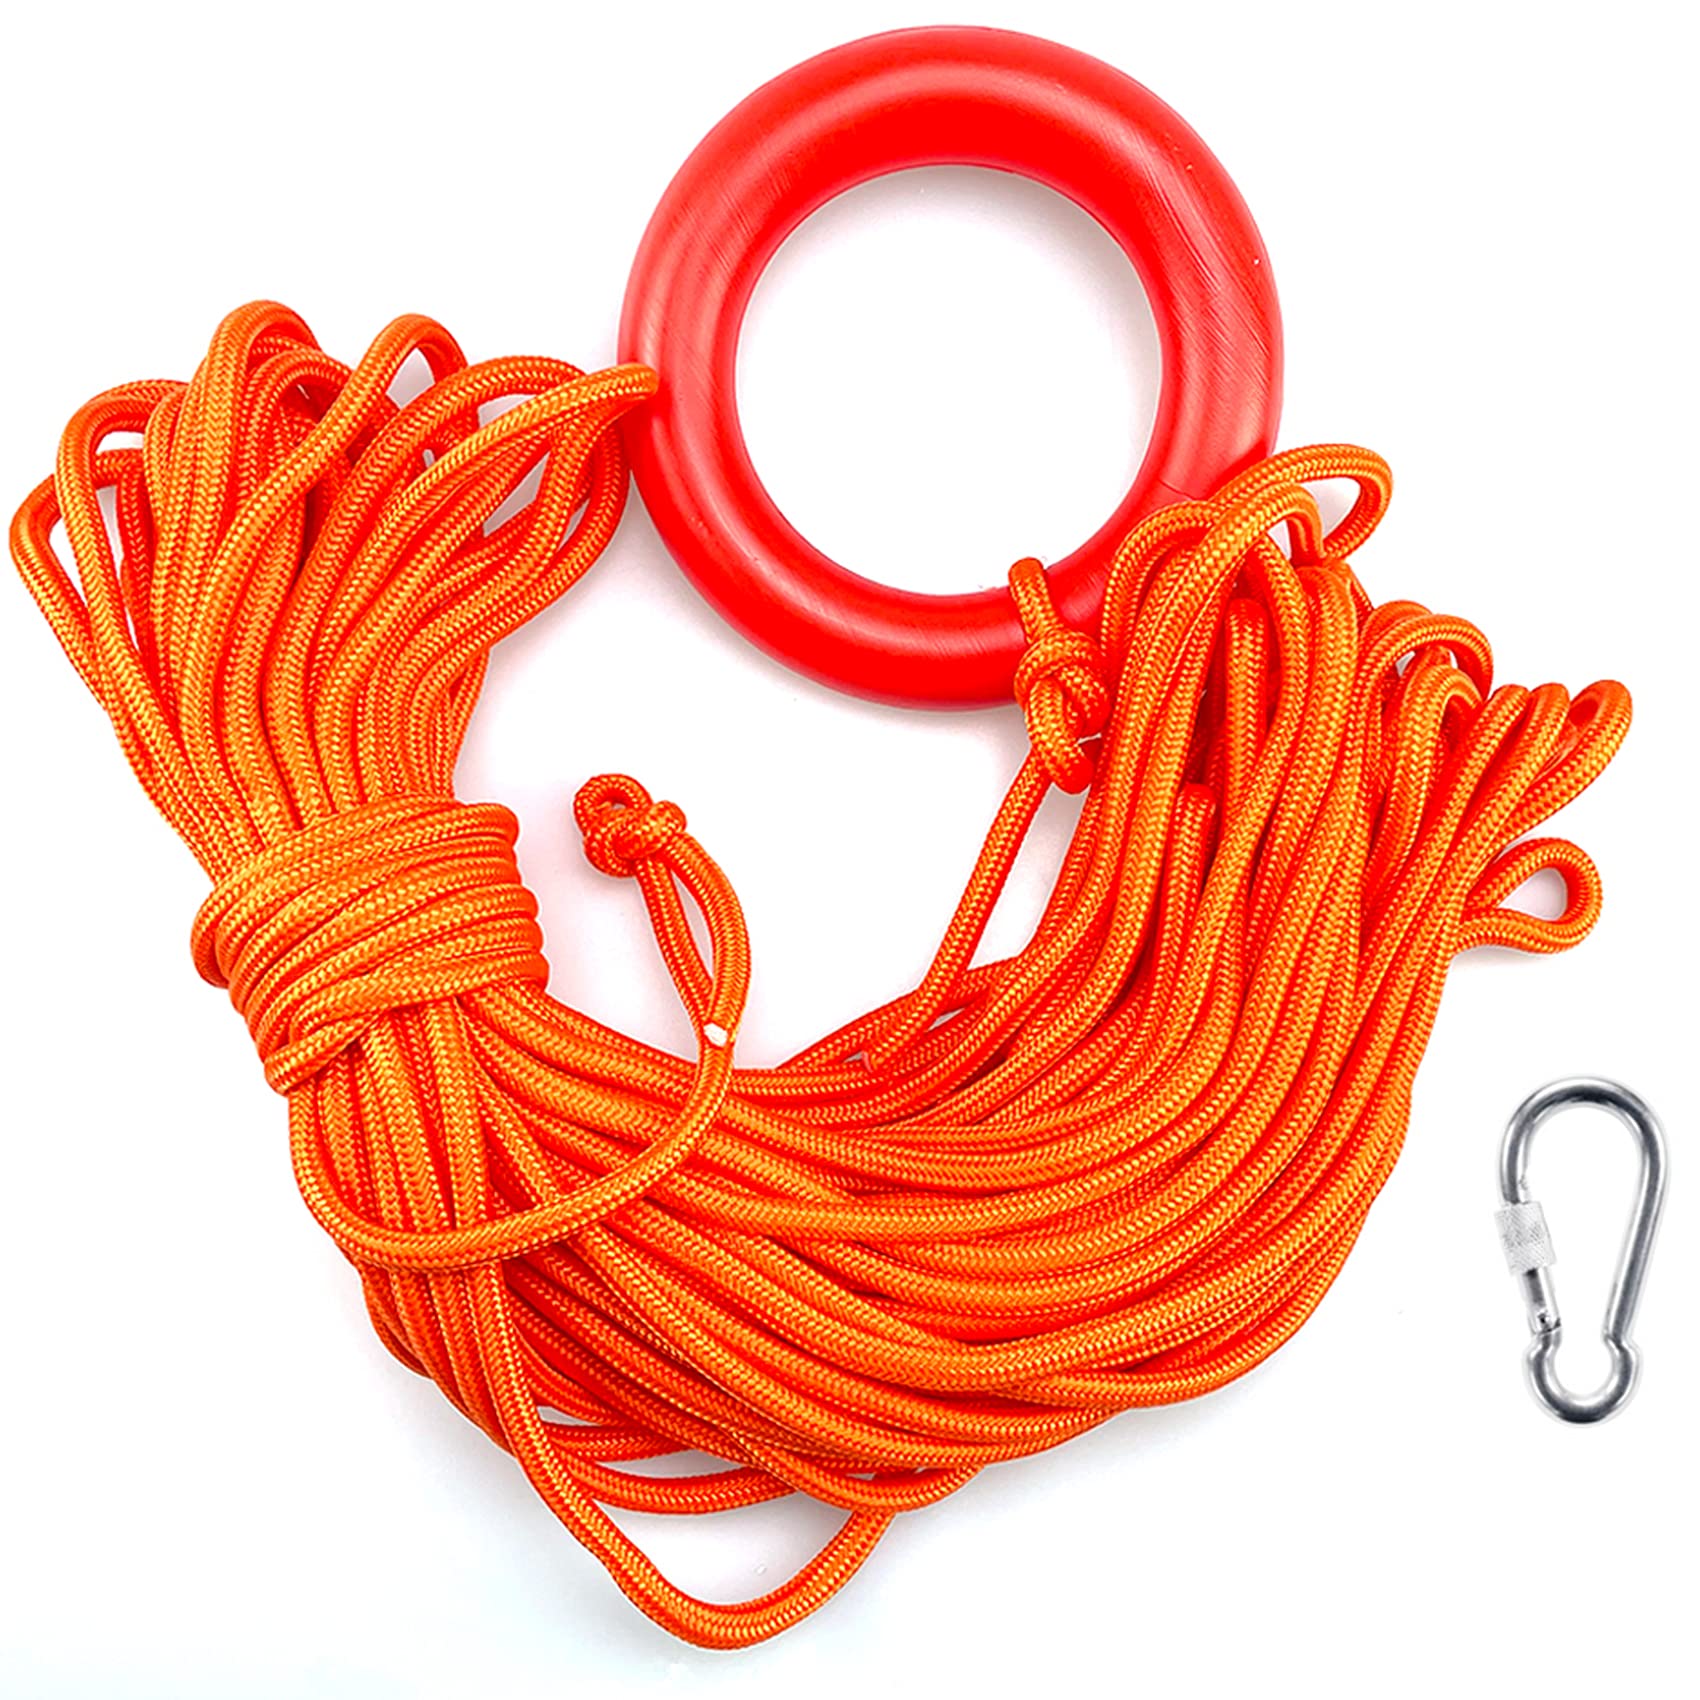 HZFLY Water Floating Lifesaving Rope, 98.4FT Outdoor Professional